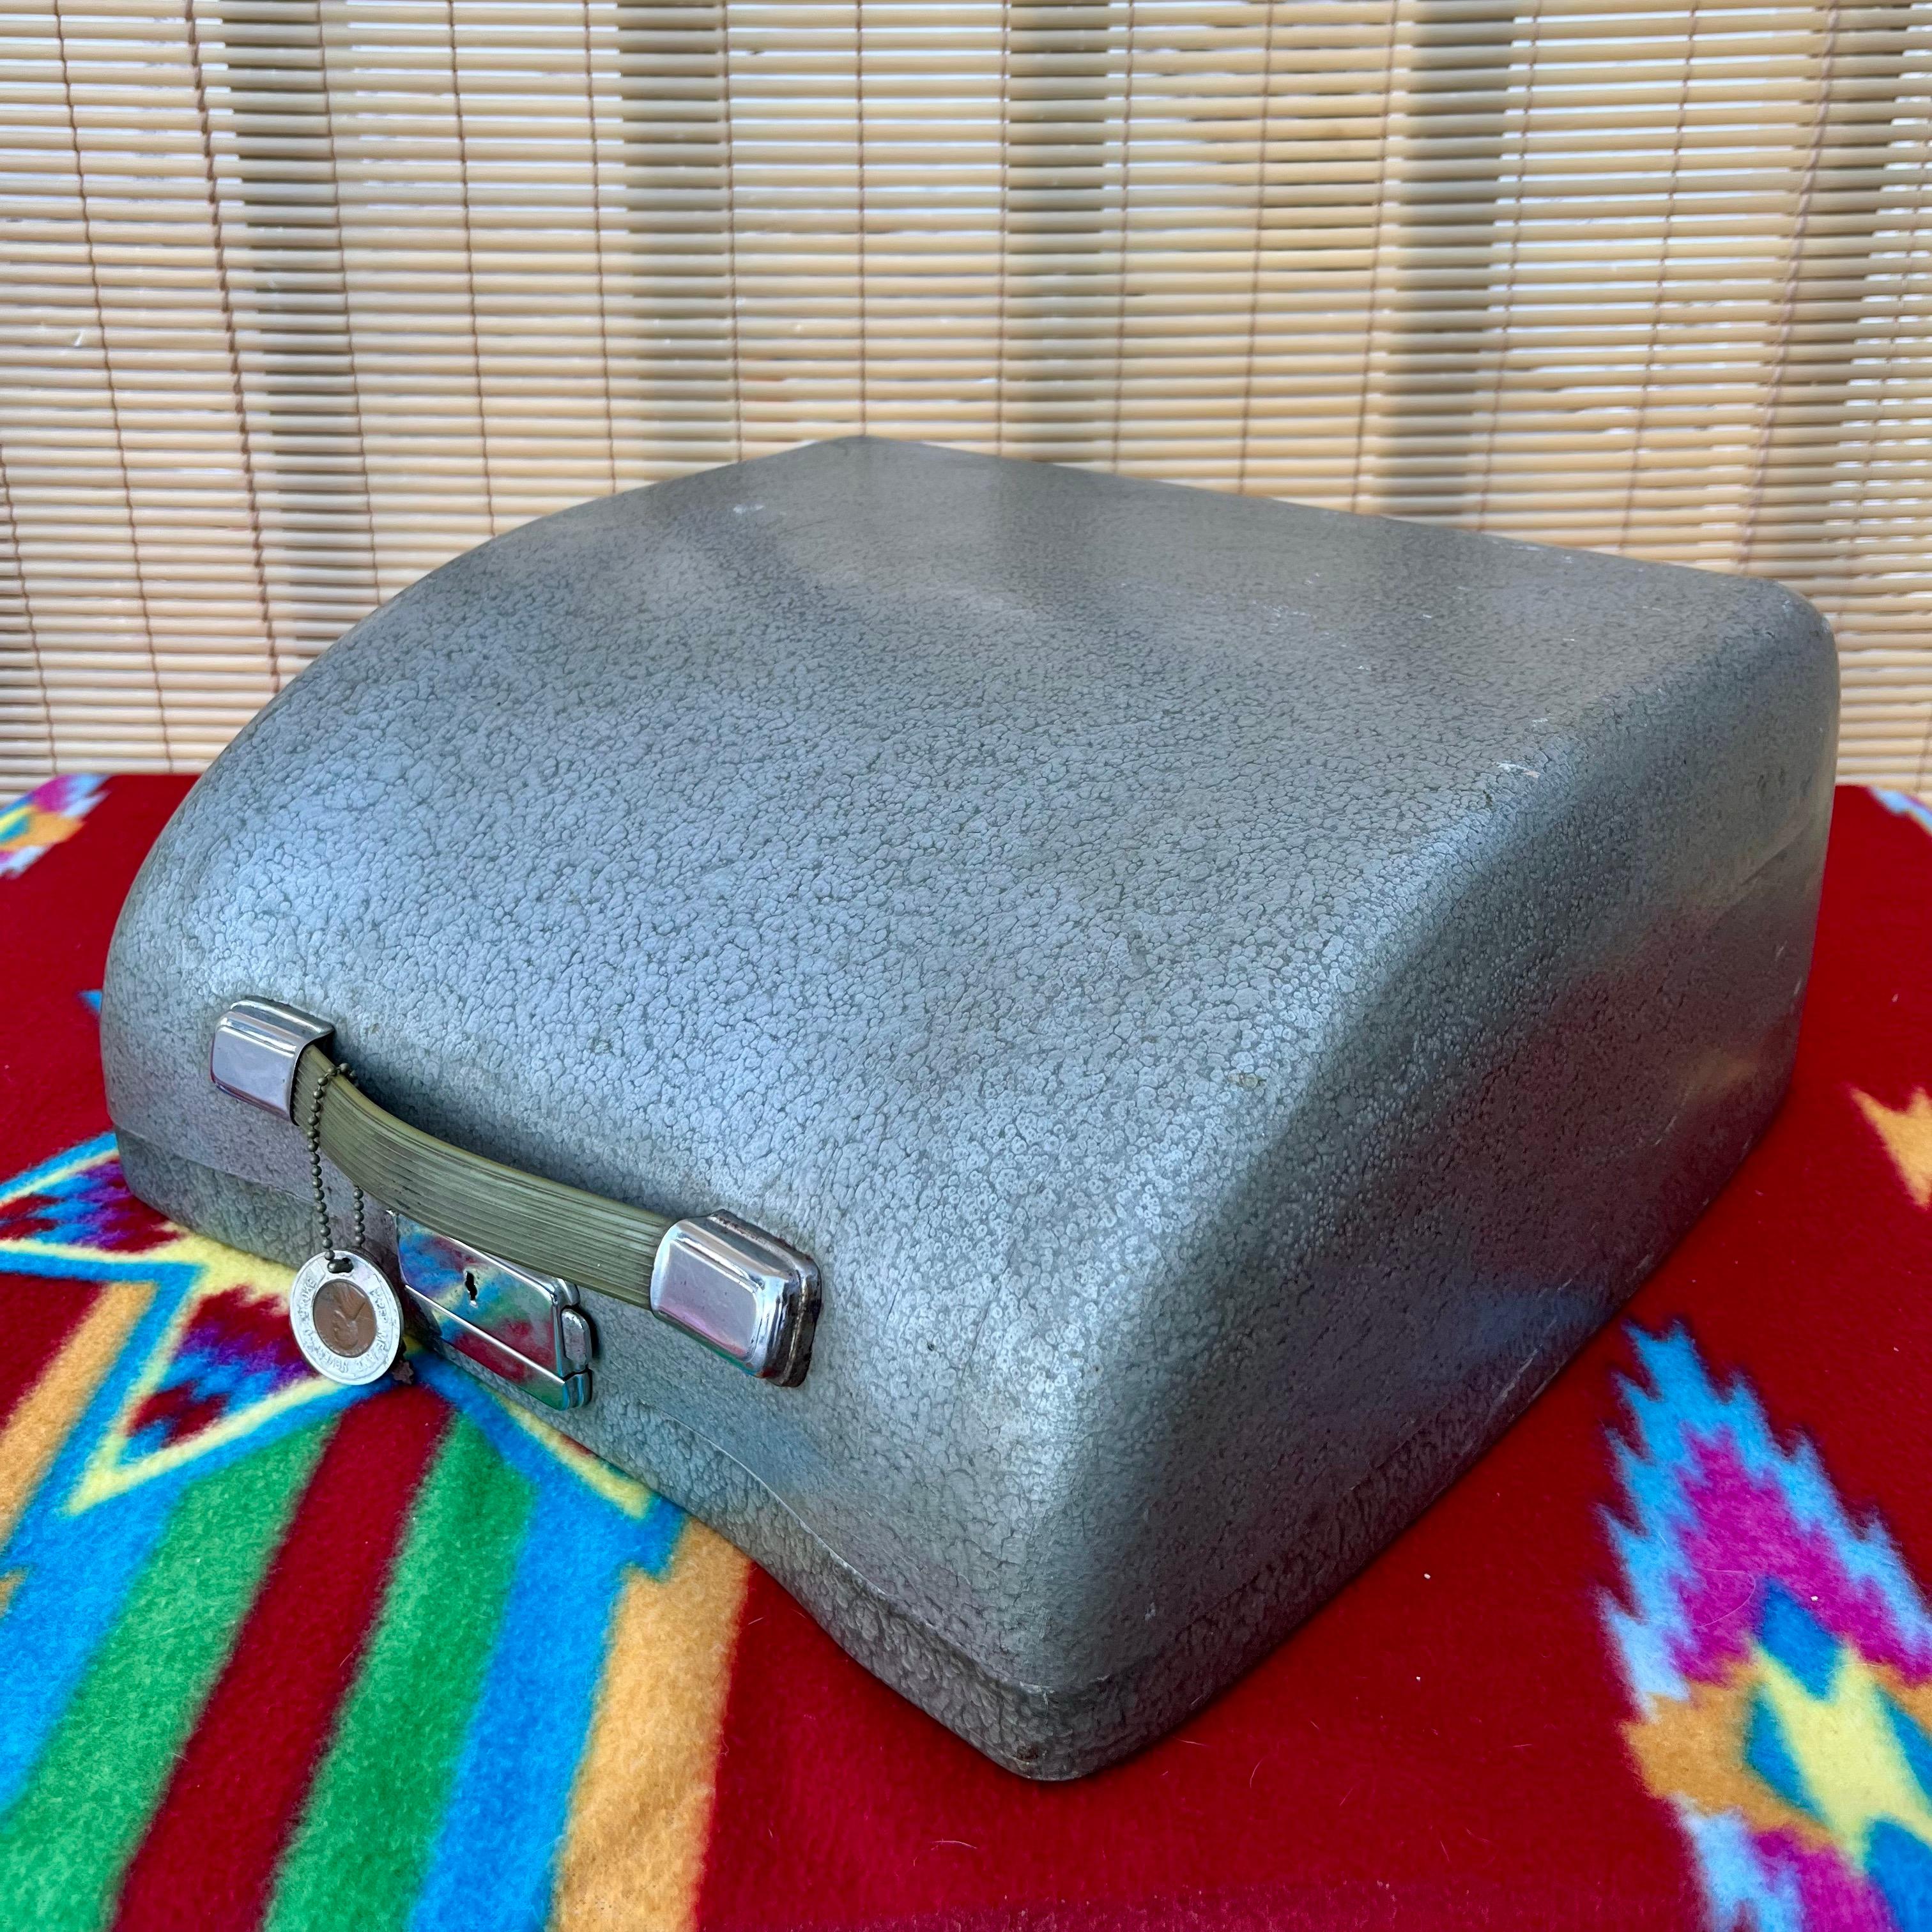 1950s Mid-Century Modern Olympia Sm-3 Portable Typewriter with Case For Sale 1